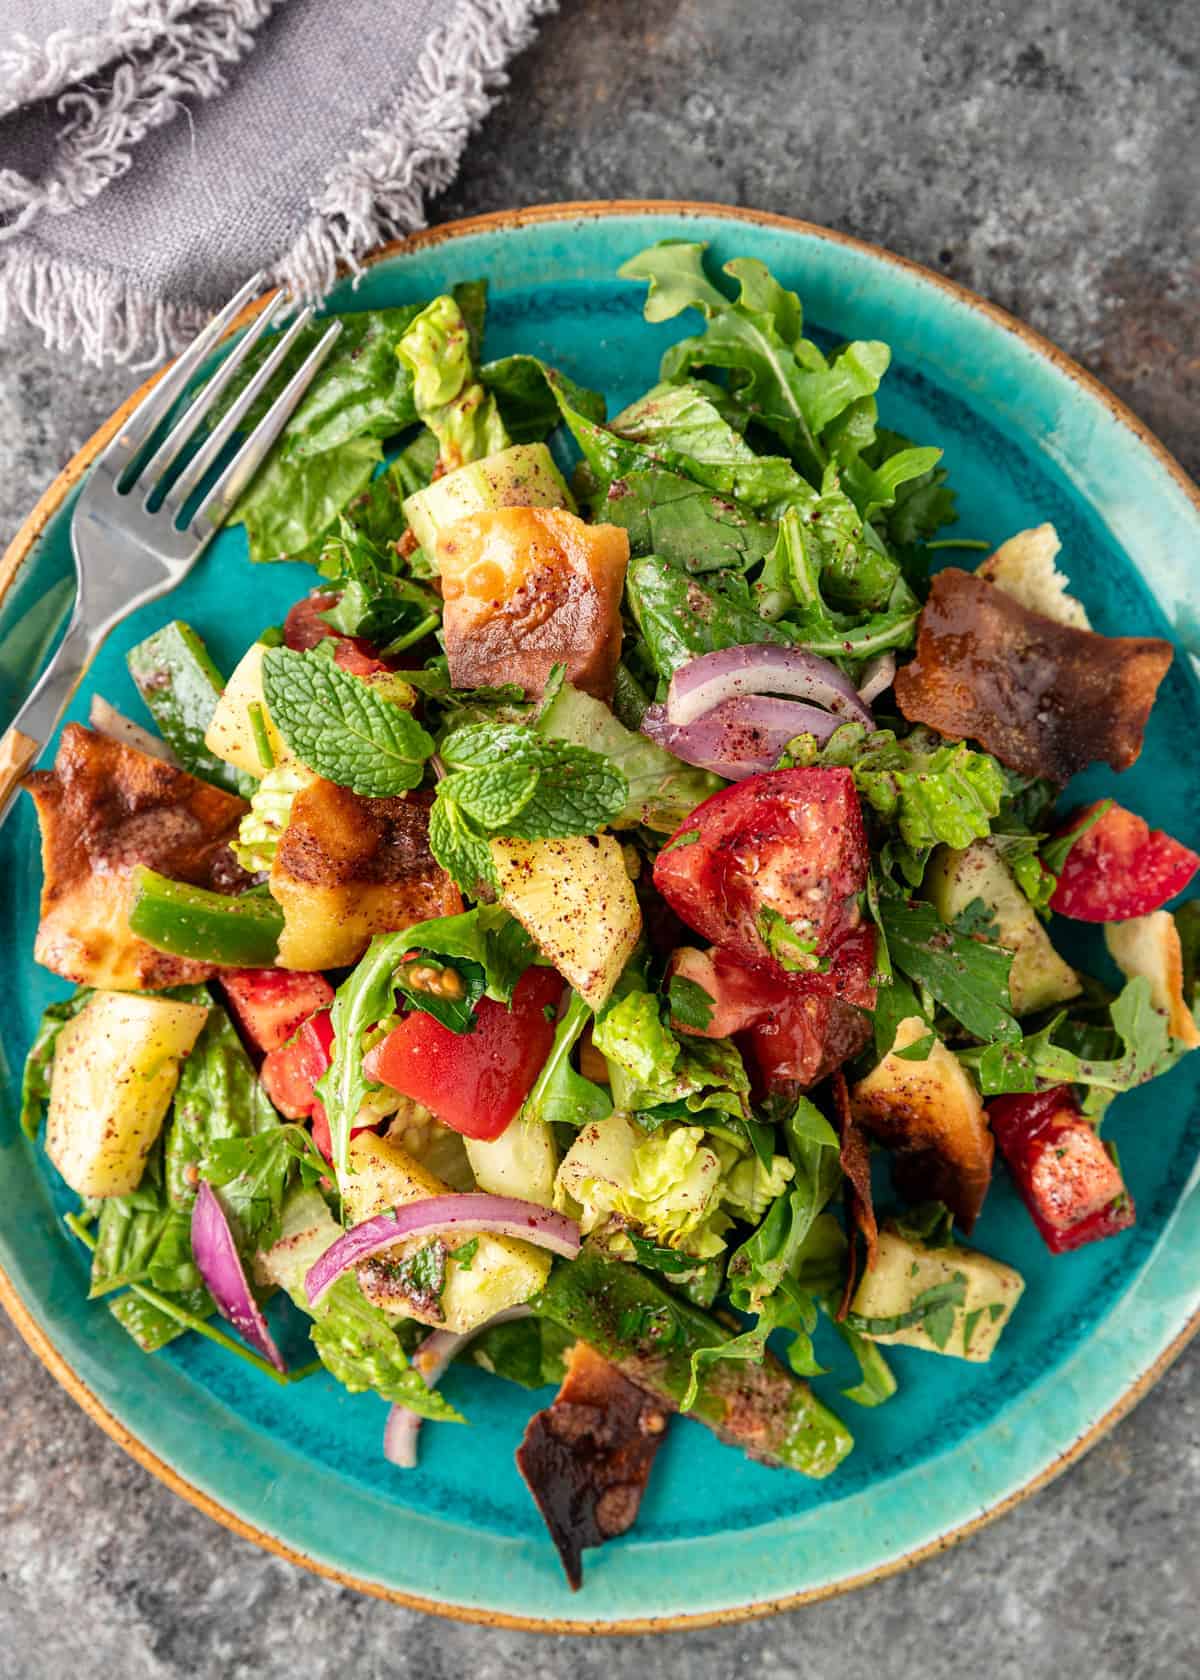 Lebanese Fattoush salad on a blue plate with a fork.